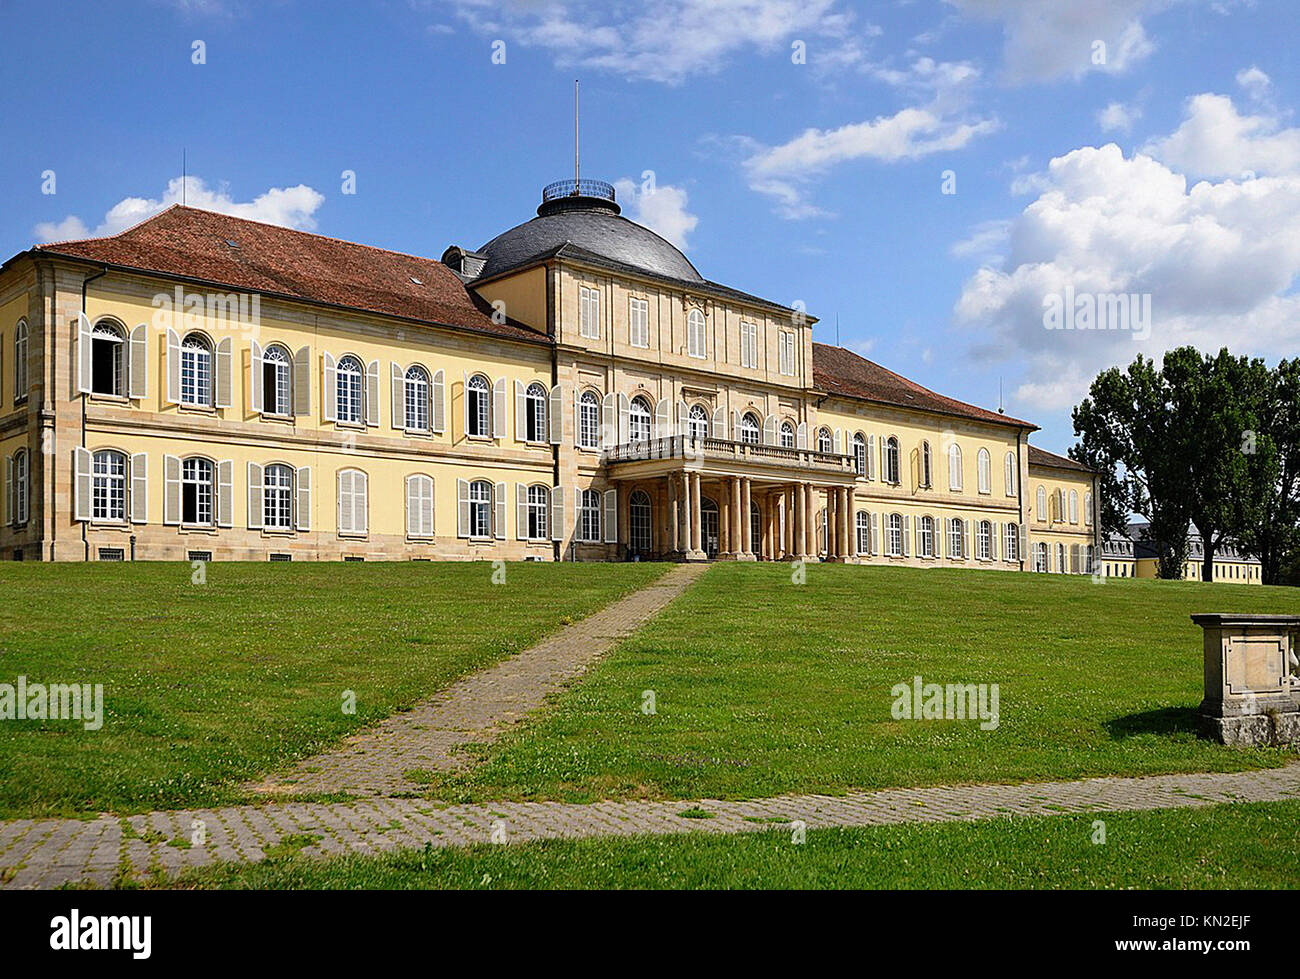 view of ancient baroque castle and his garden in surroundings of Stuttgart, now used as an university campus  Shot in bright summer light Stock Photo